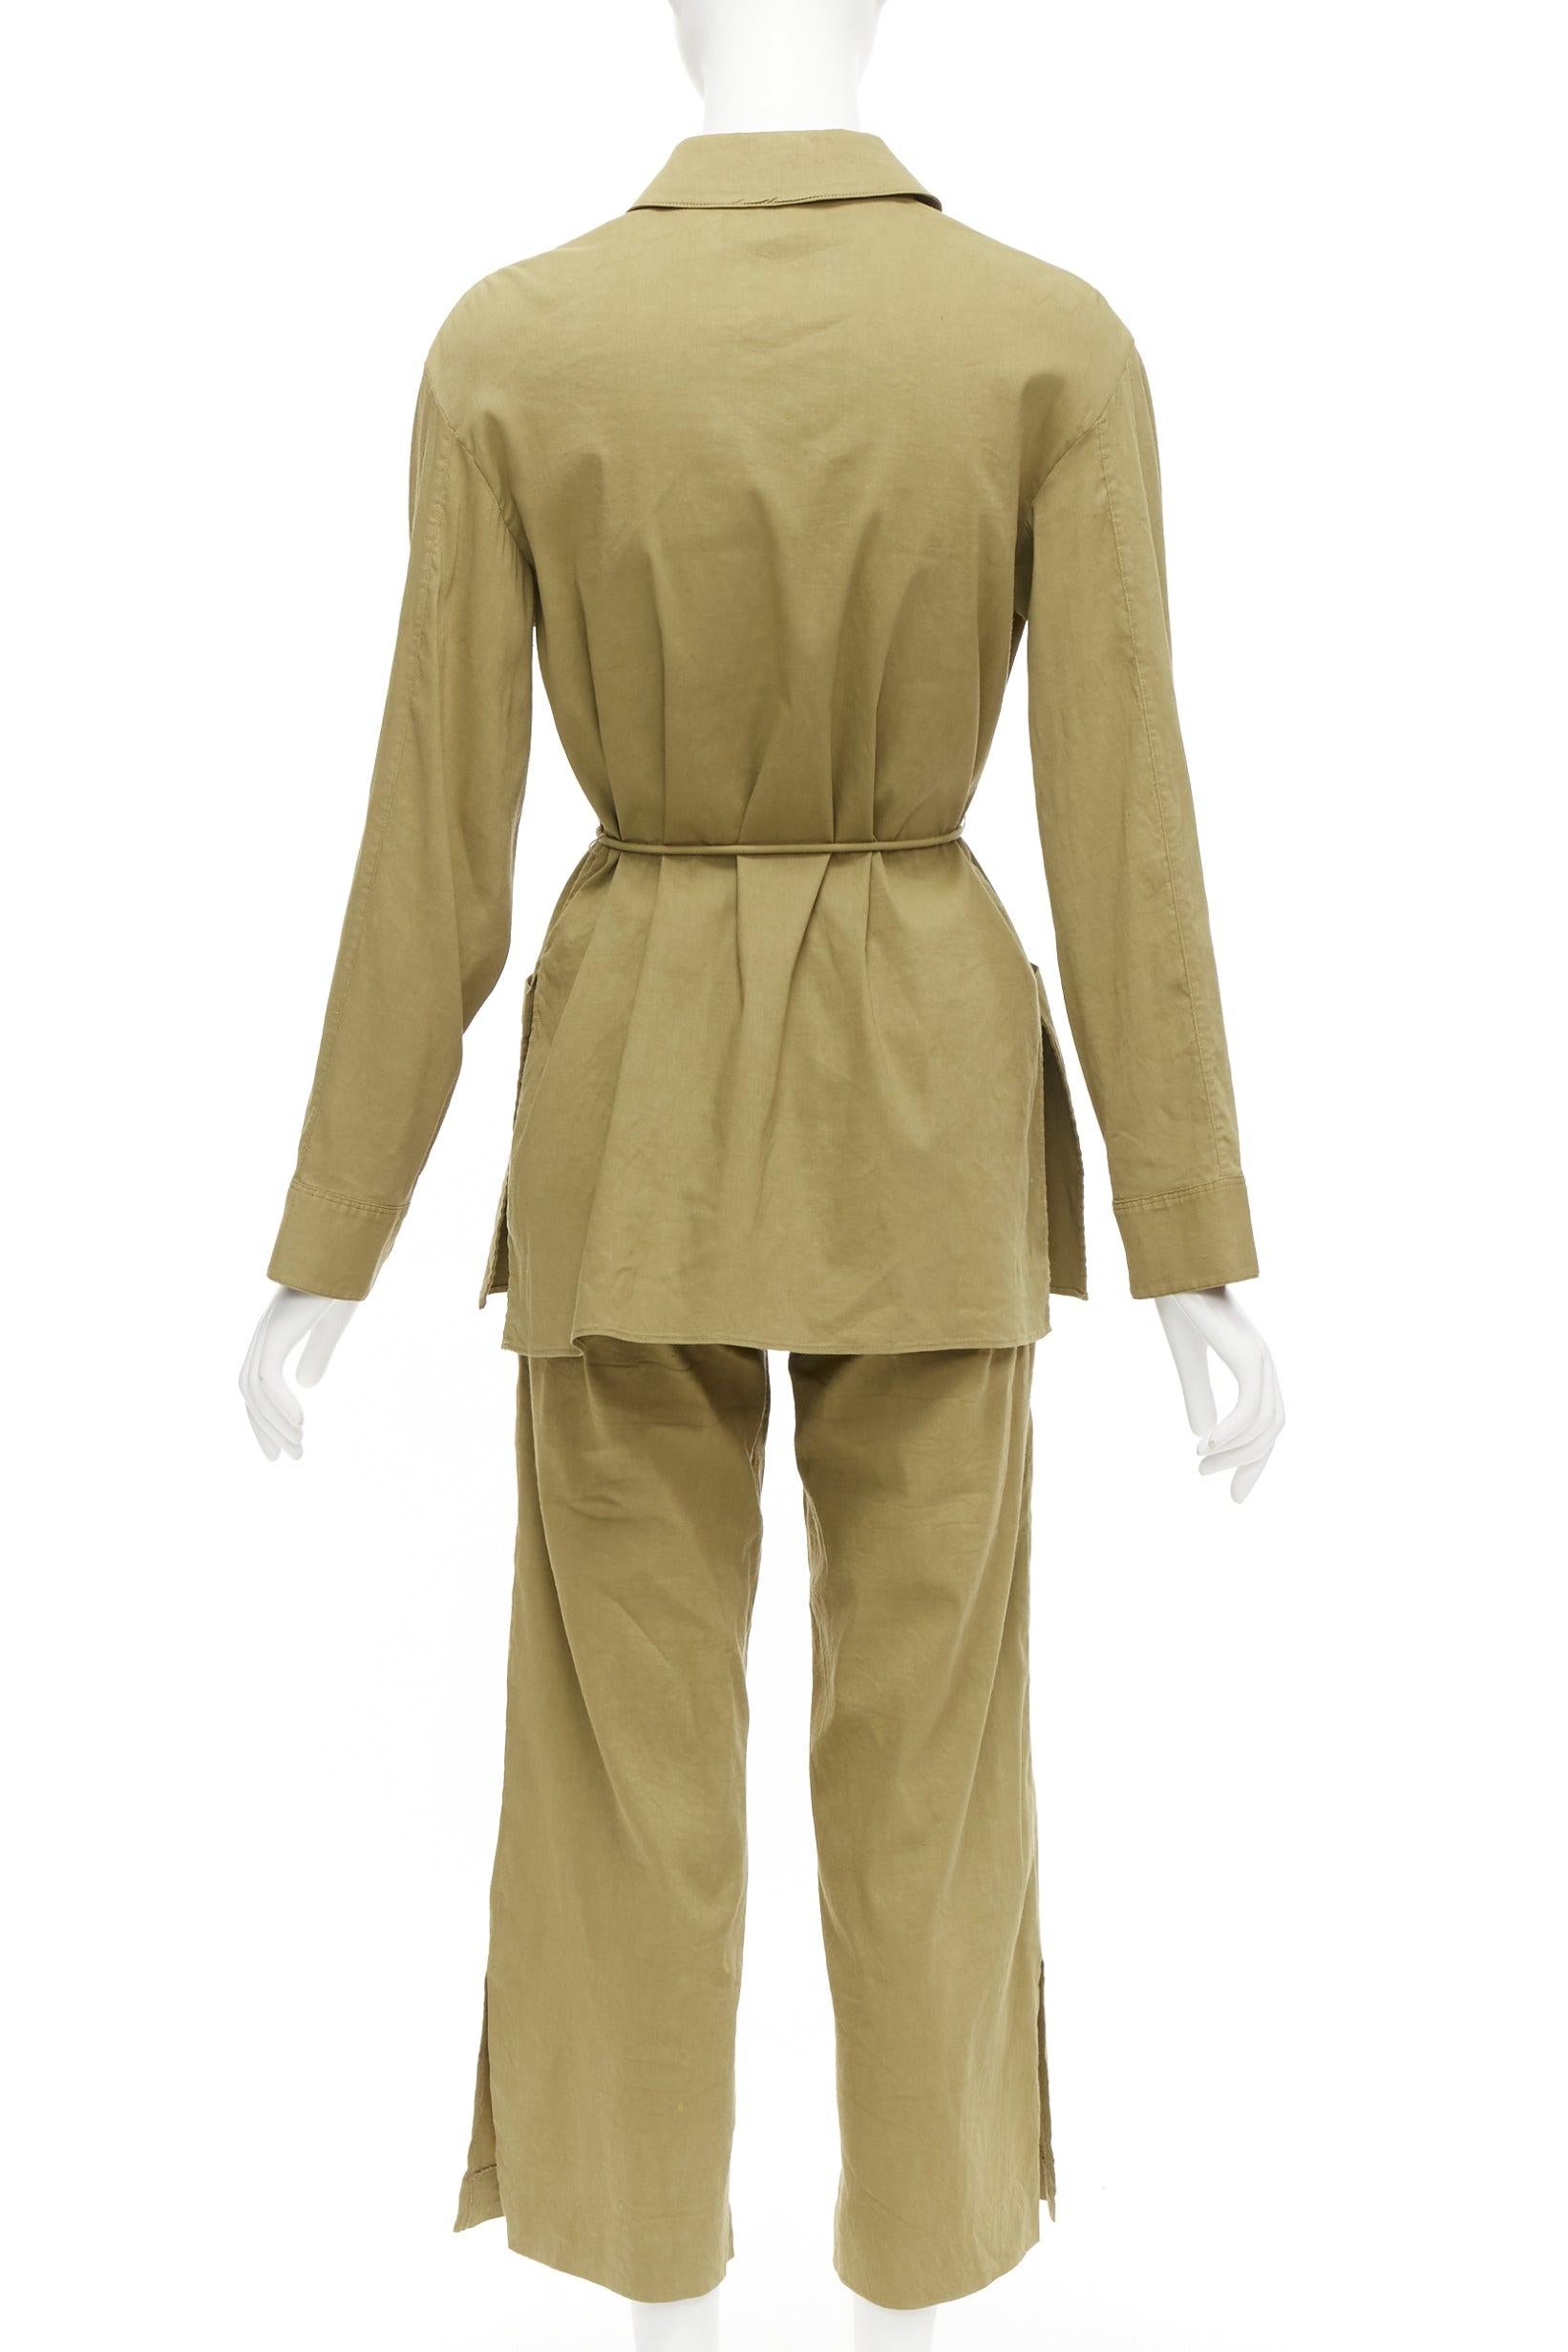 Women's THEORY olive green linen blend tie belt relaxed jacket wide leg pants set US0 XS For Sale